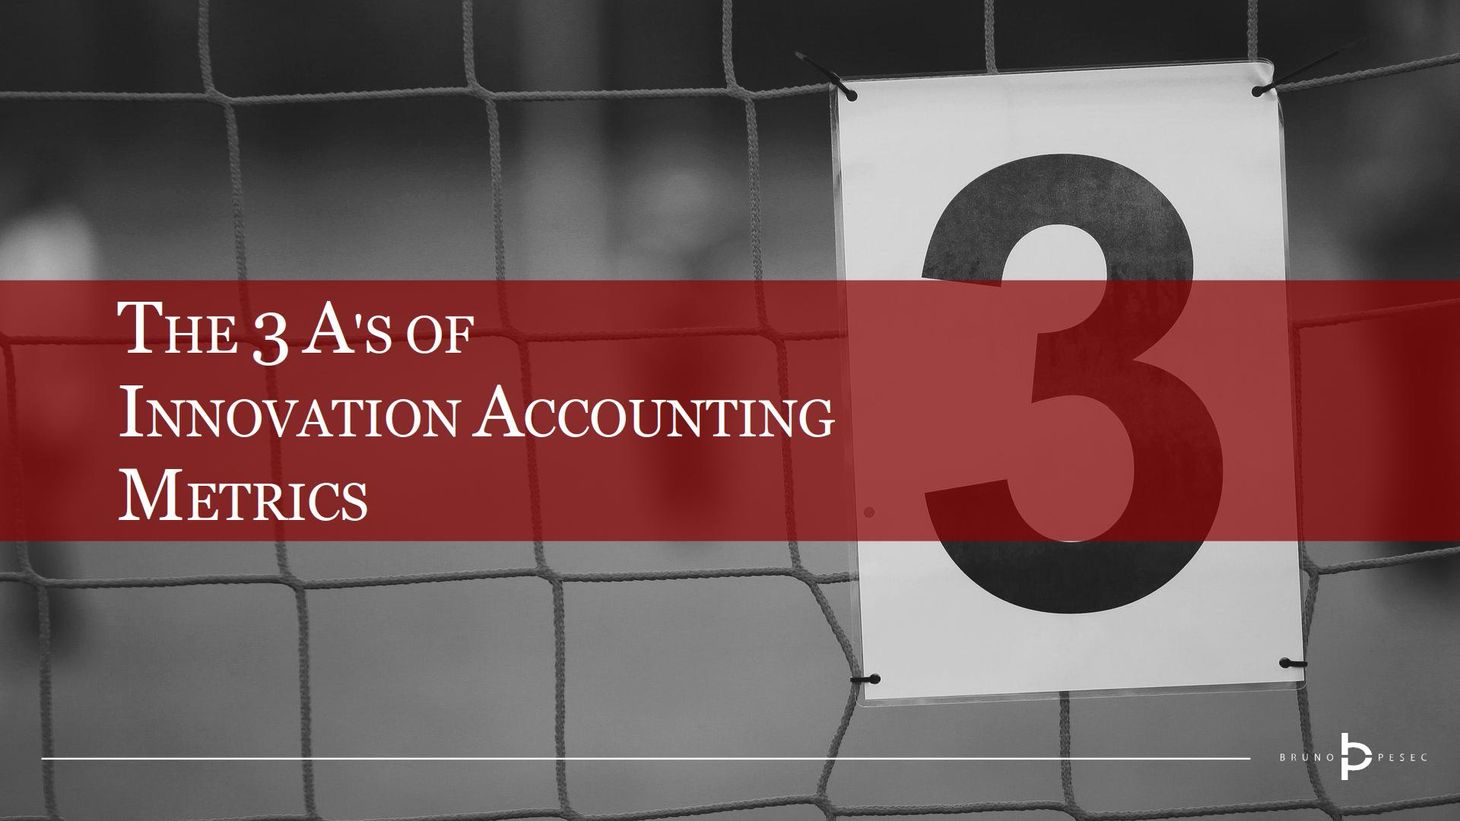 The 3 A's of innovation accounting metrics